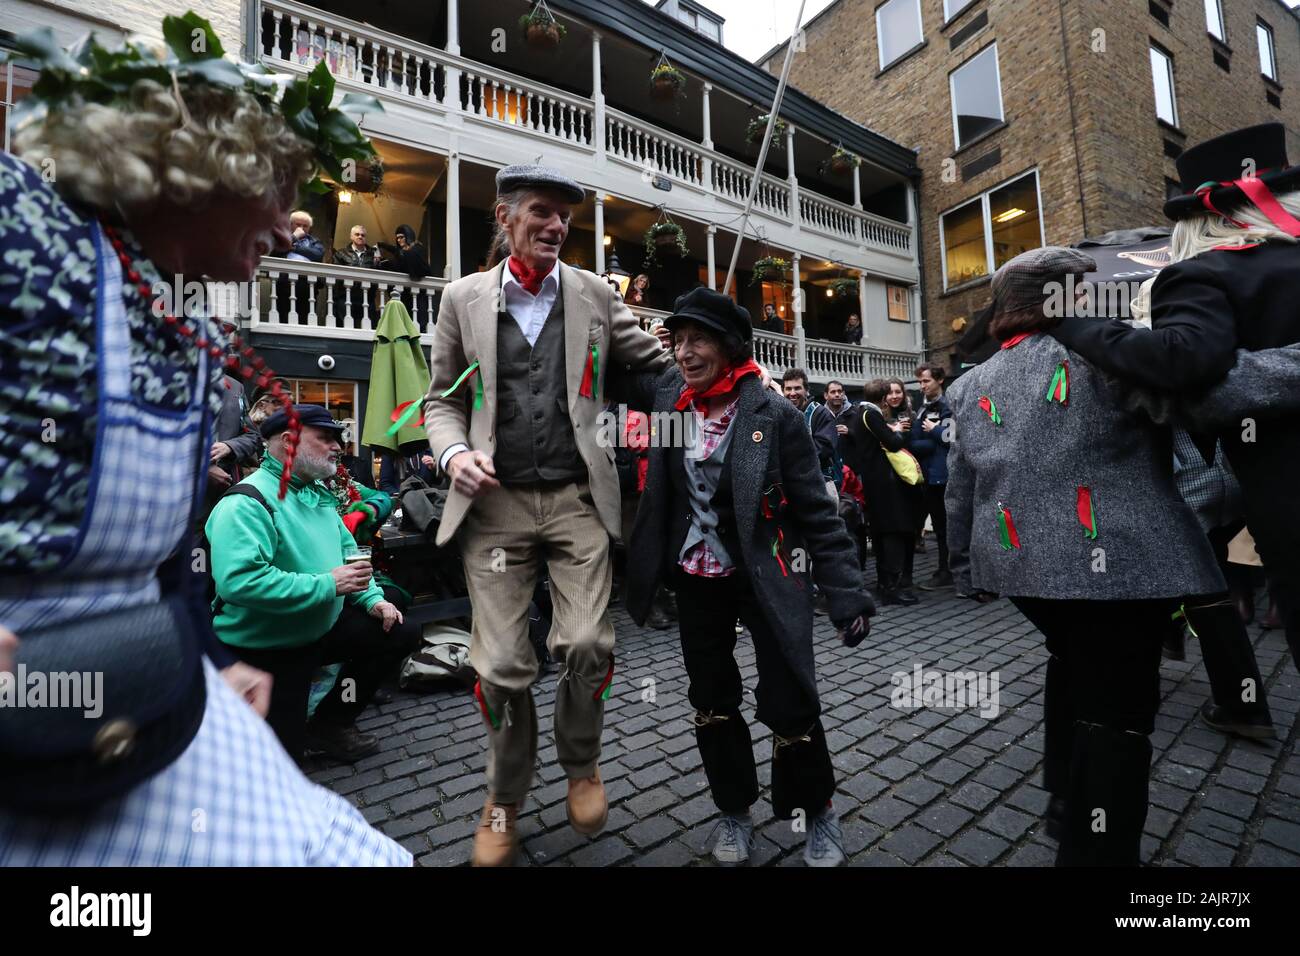 Performers during the annual Twelfth Night celebrations and mummers plays at the George Inn, in Southwark in central London. Stock Photo